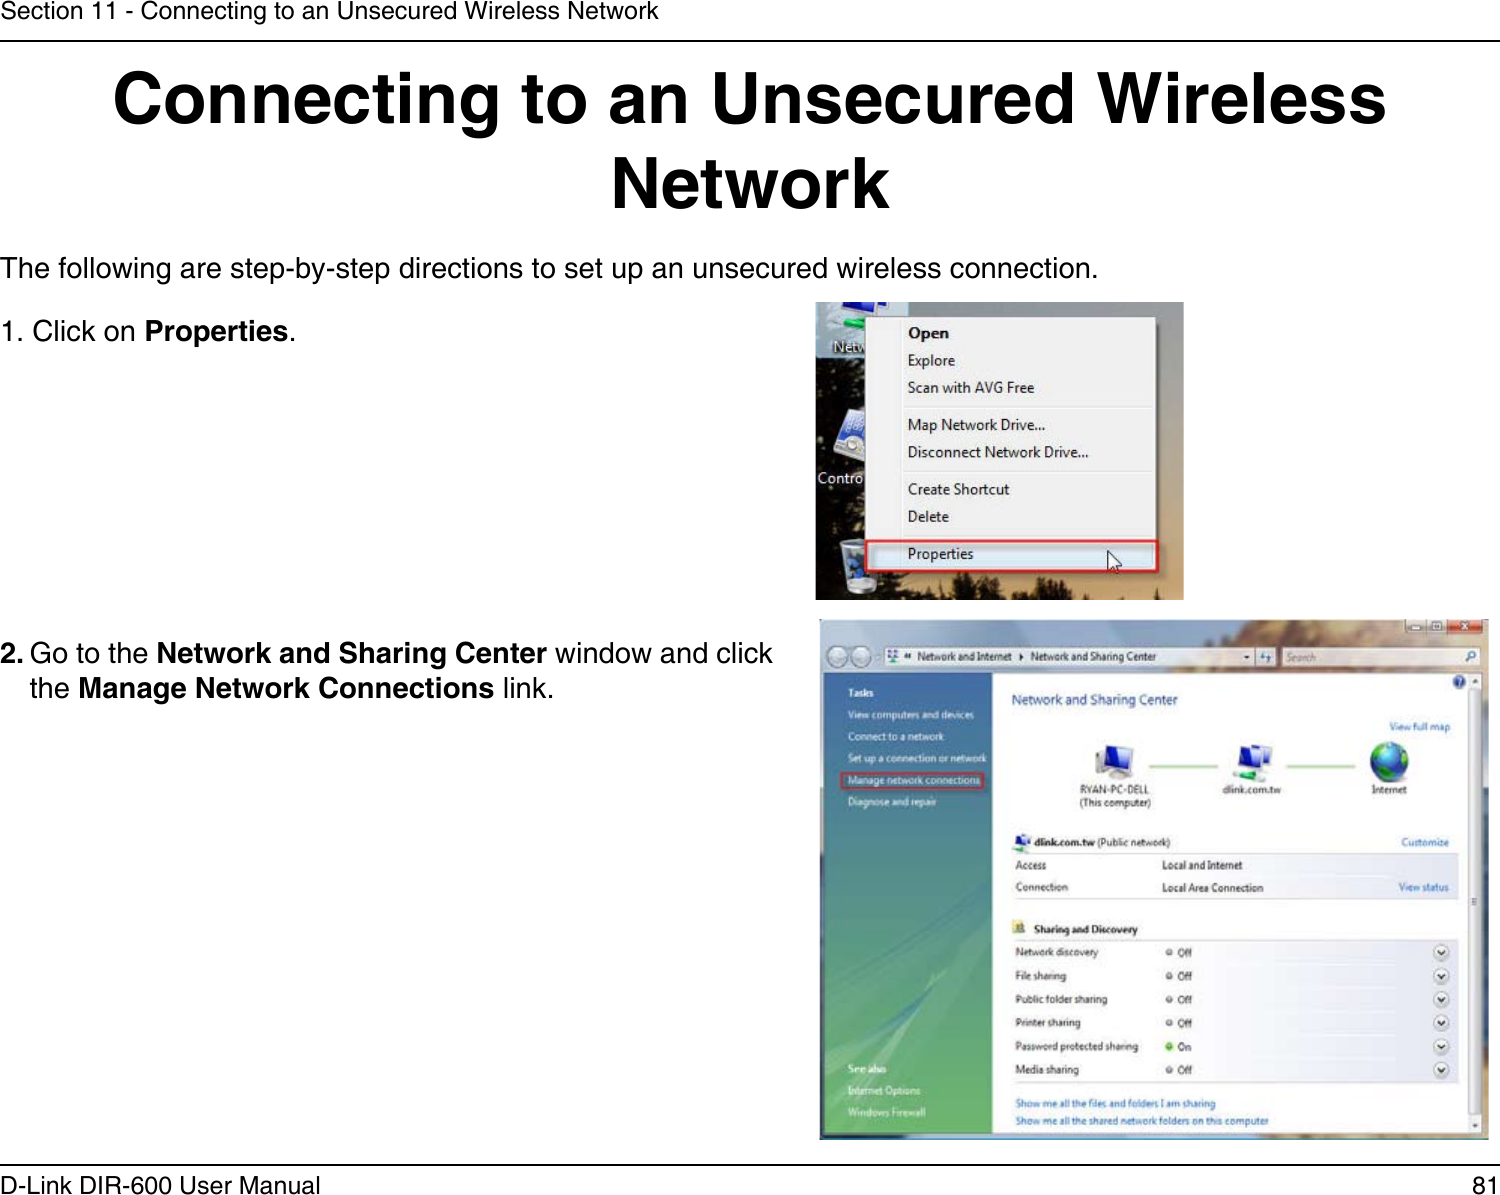 81D-Link DIR-600 User ManualSection 11 - Connecting to an Unsecured Wireless NetworkConnecting to an Unsecured Wireless NetworkThe following are step-by-step directions to set up an unsecured wireless connection.2. Go to the Network and Sharing Center window and click the Manage Network Connections link. 1. Click on Properties.     